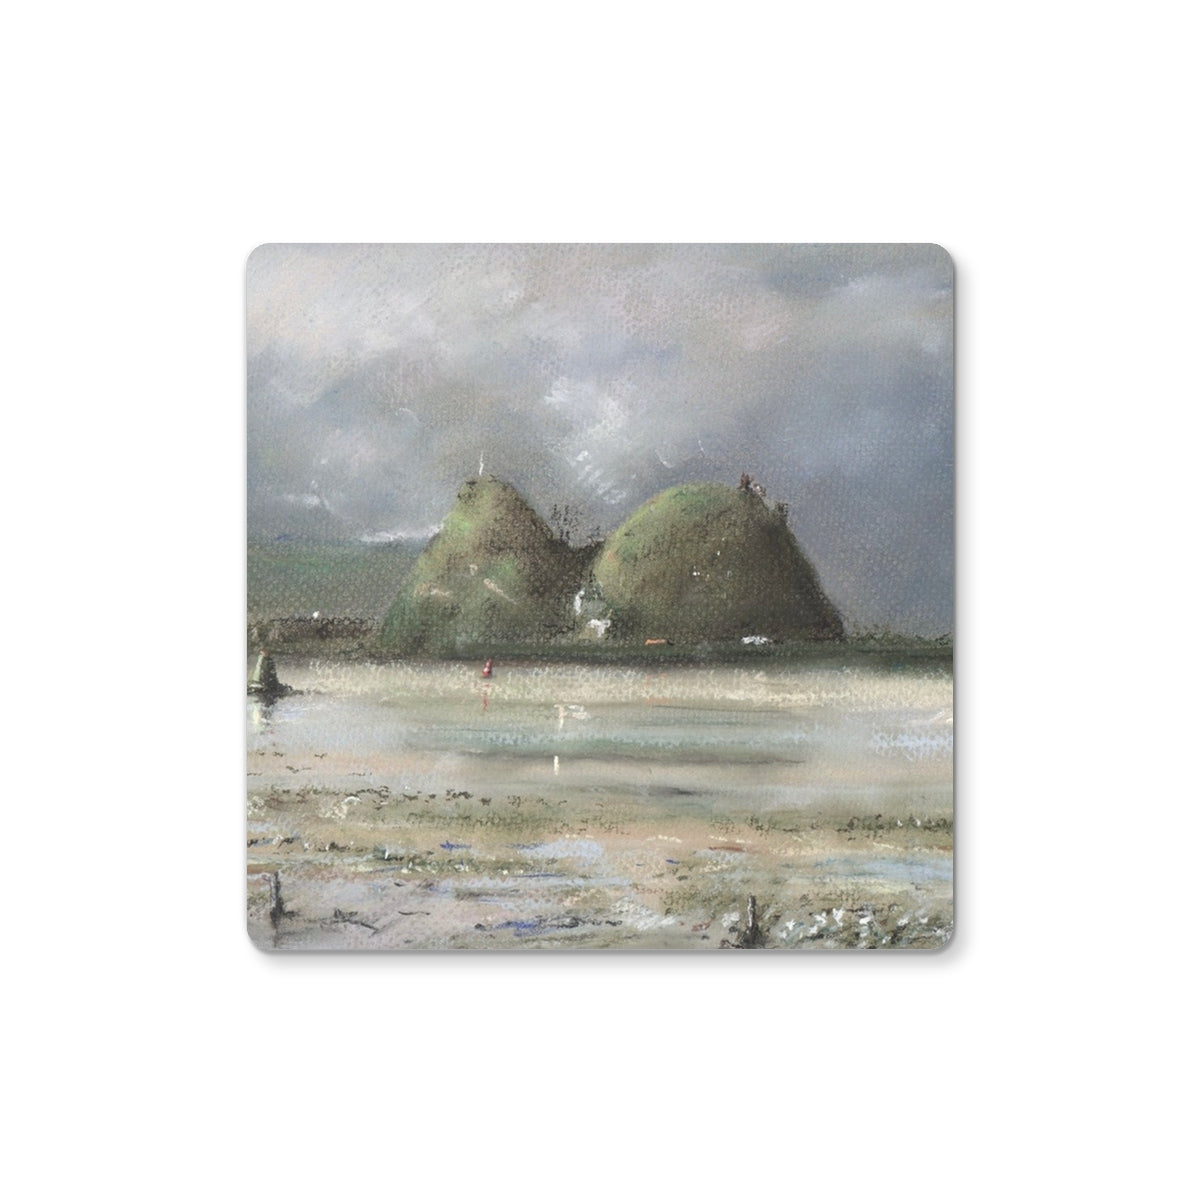 Dumbarton Rock Art Gifts Coaster-Homeware-River Clyde Art Gallery-Single Coaster-Paintings, Prints, Homeware, Art Gifts From Scotland By Scottish Artist Kevin Hunter